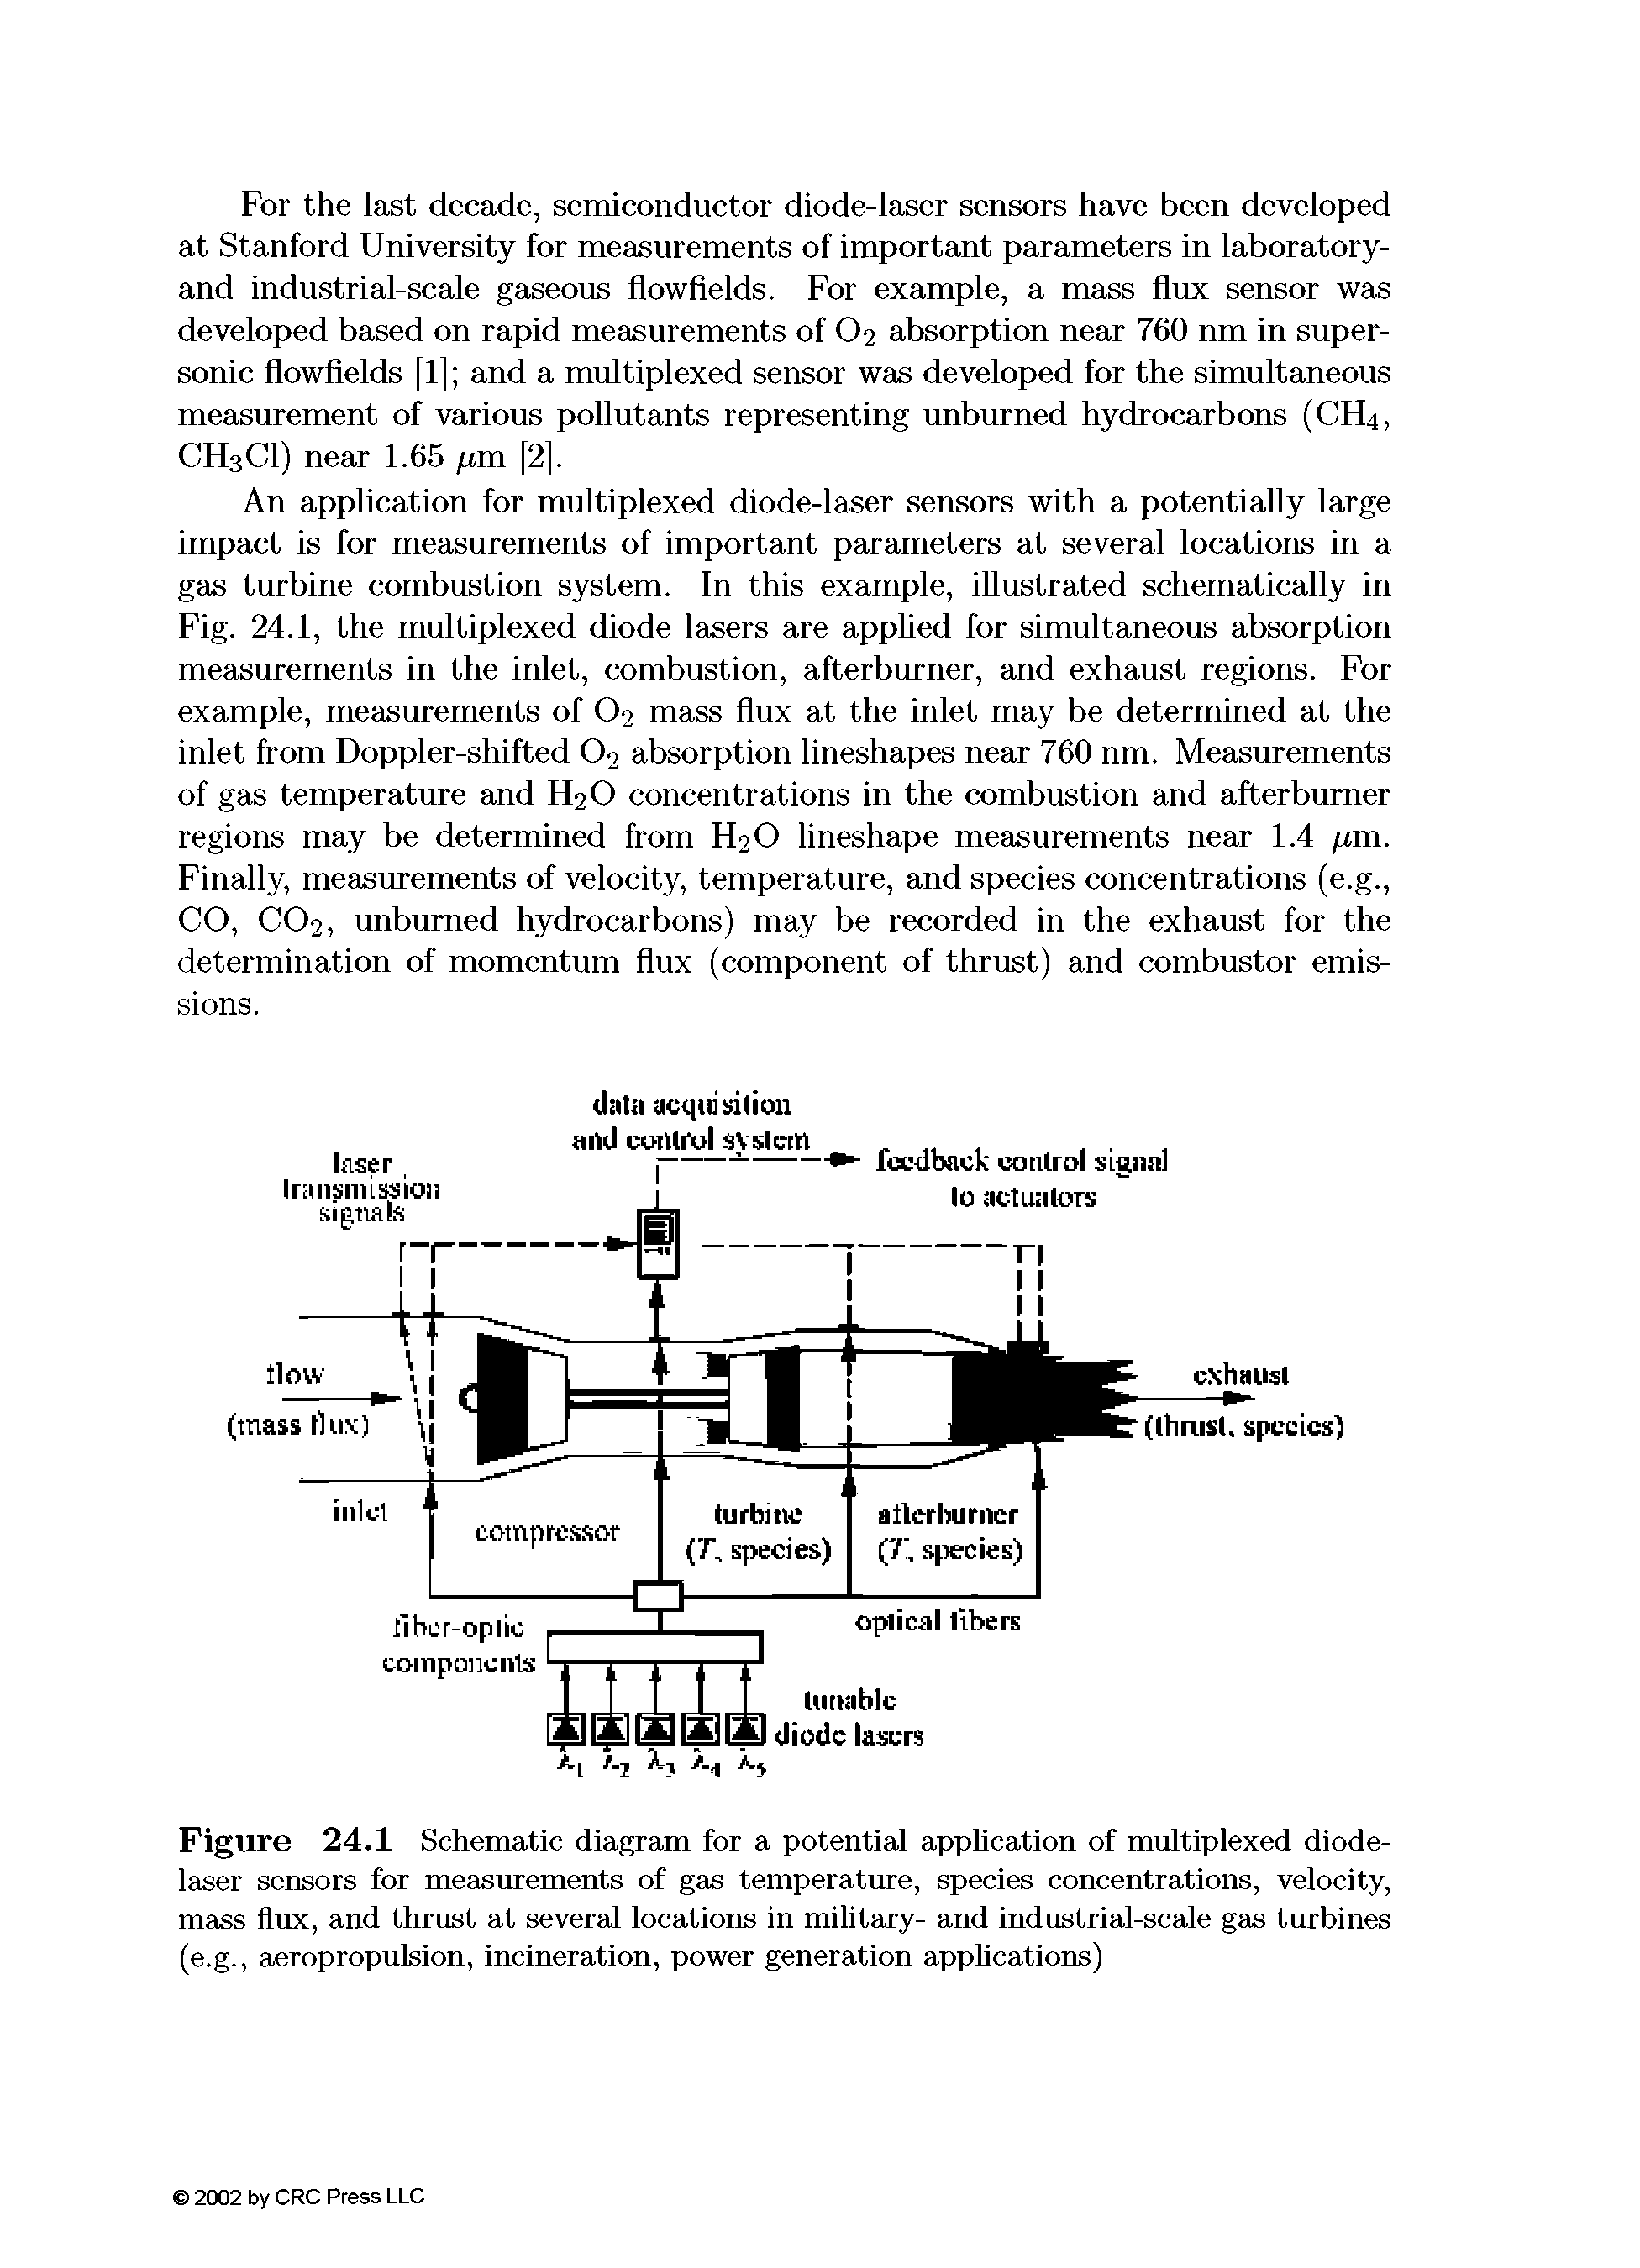 Figure 24.1 Schematic diagram for a potential application of multiplexed diode-laser sensors for measurements of gas temperature, species concentrations, velocity, mass flux, and thrust at several locations in military- and industrial-scale gas turbines (e.g., aeropropulsion, incineration, power generation appheations)...